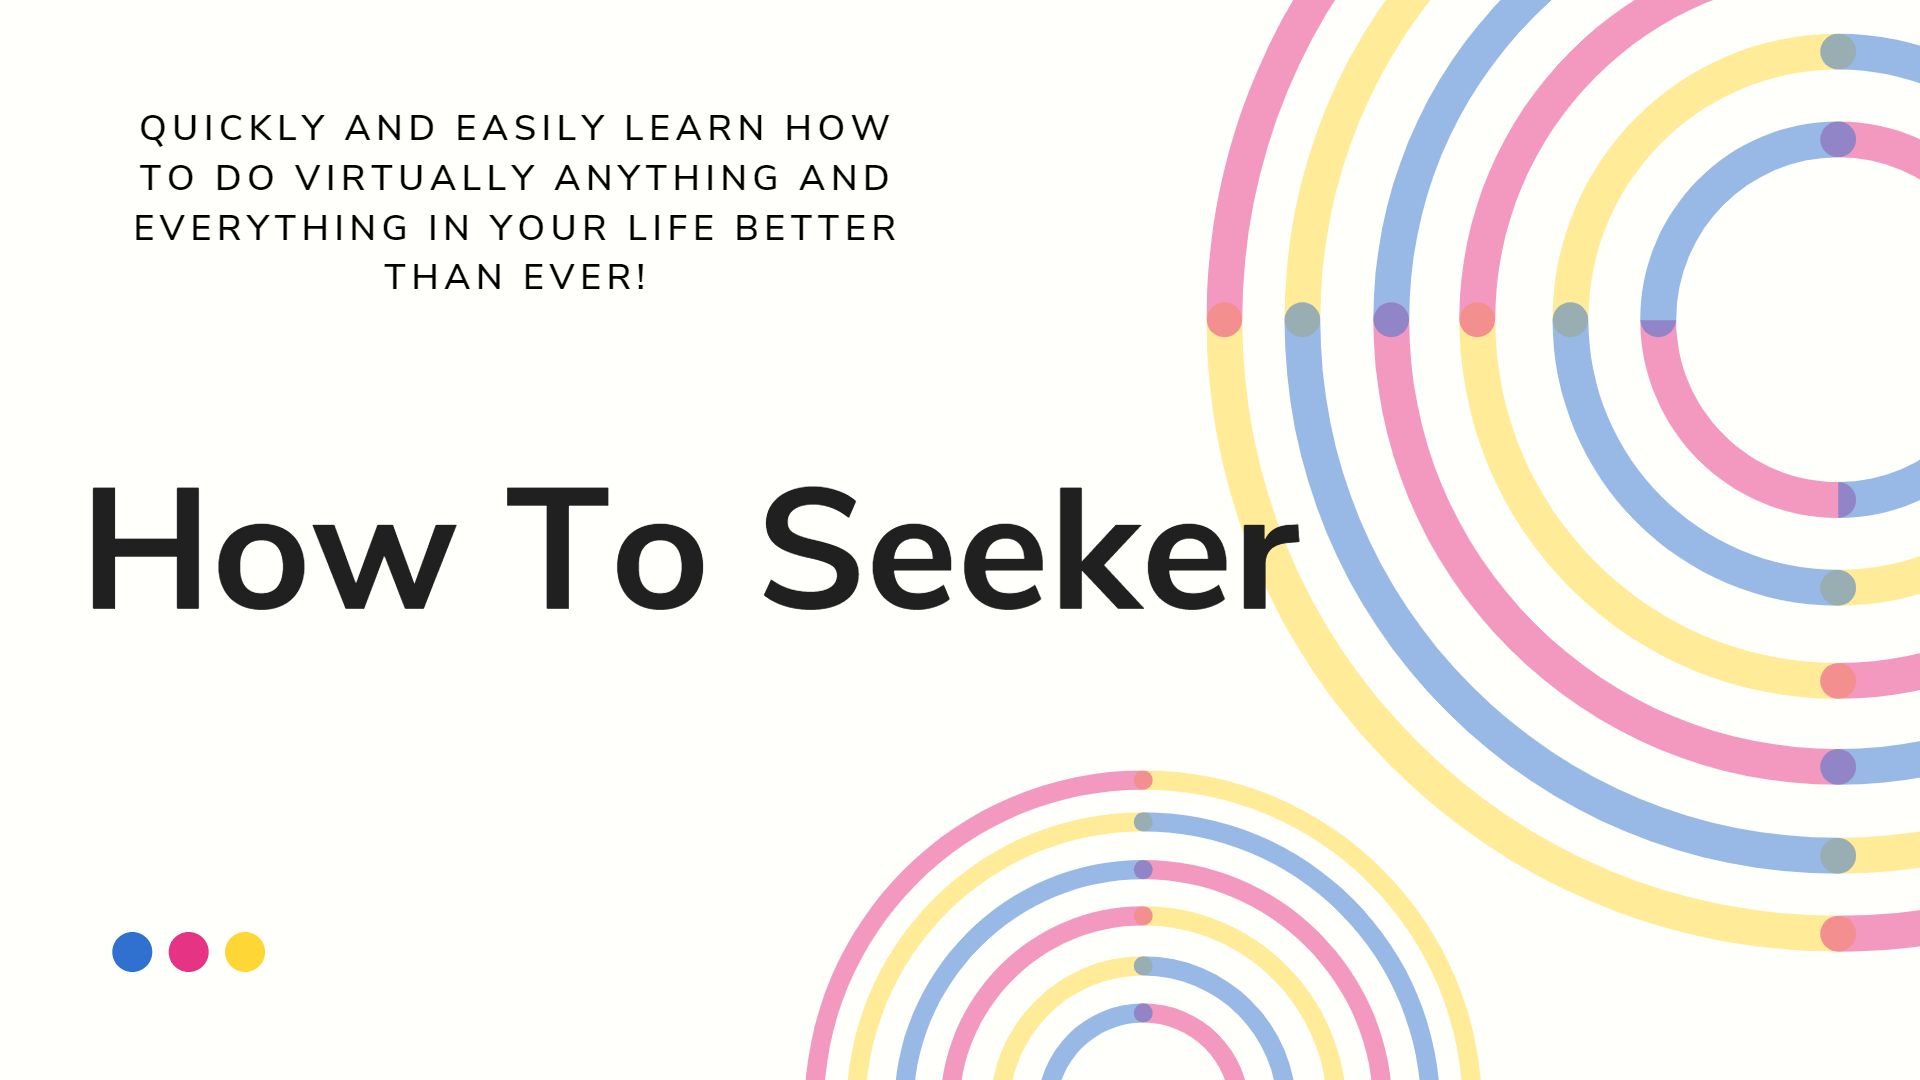 How To Seeker Quickly and Easily Learn How to do virtually anything